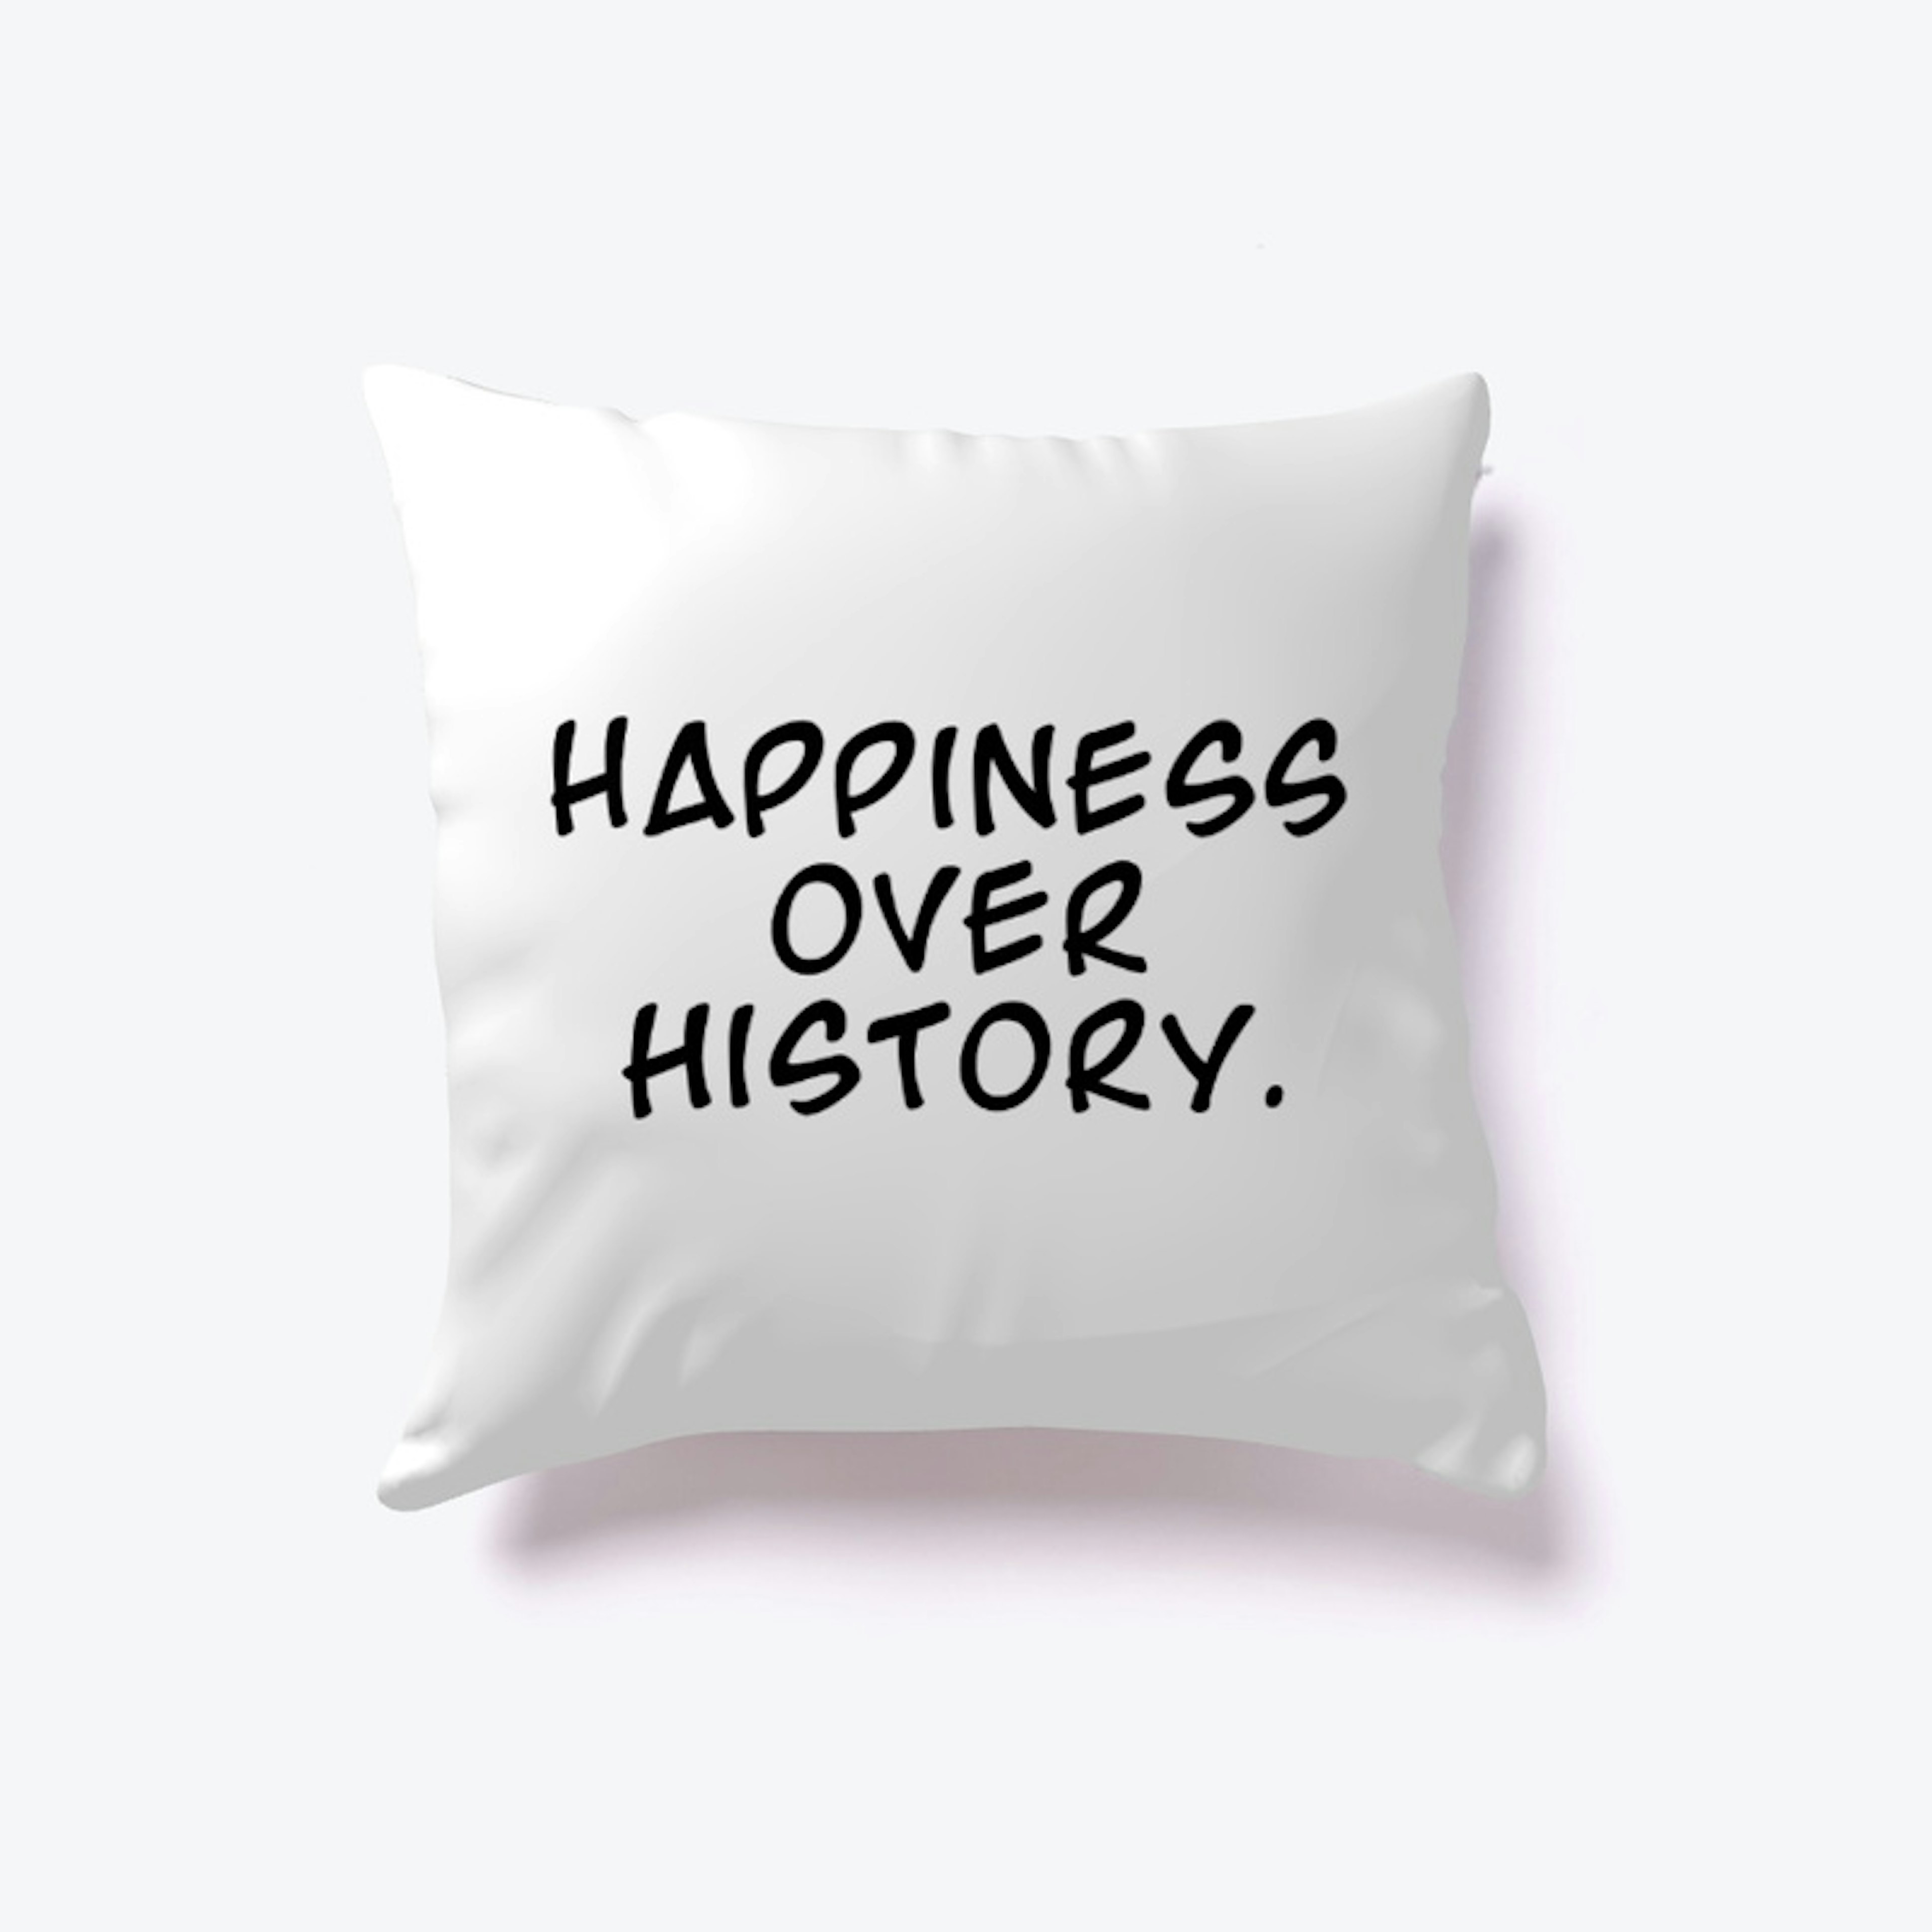 Happiness over History